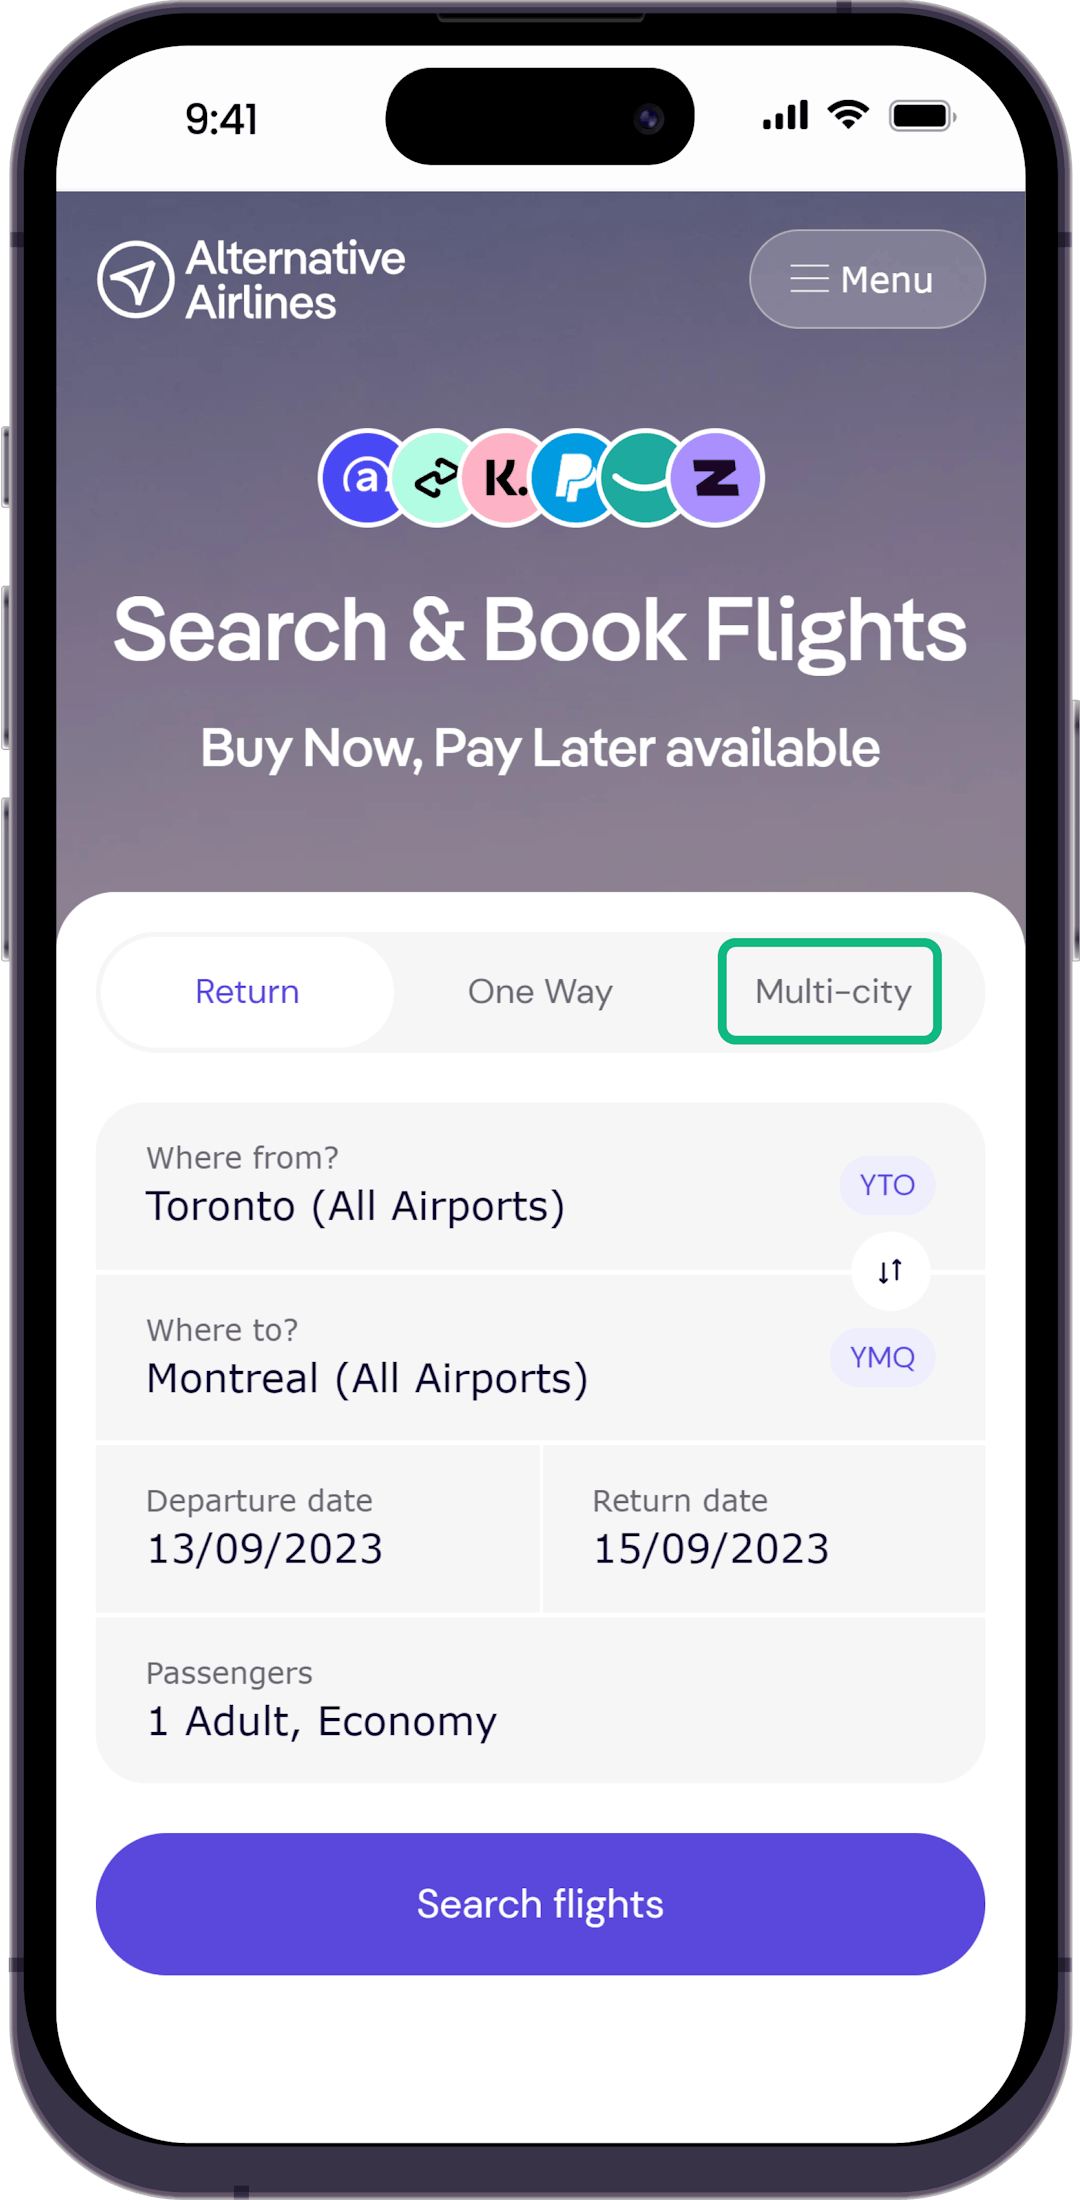 Step 1 - Select multi-city option in the search form